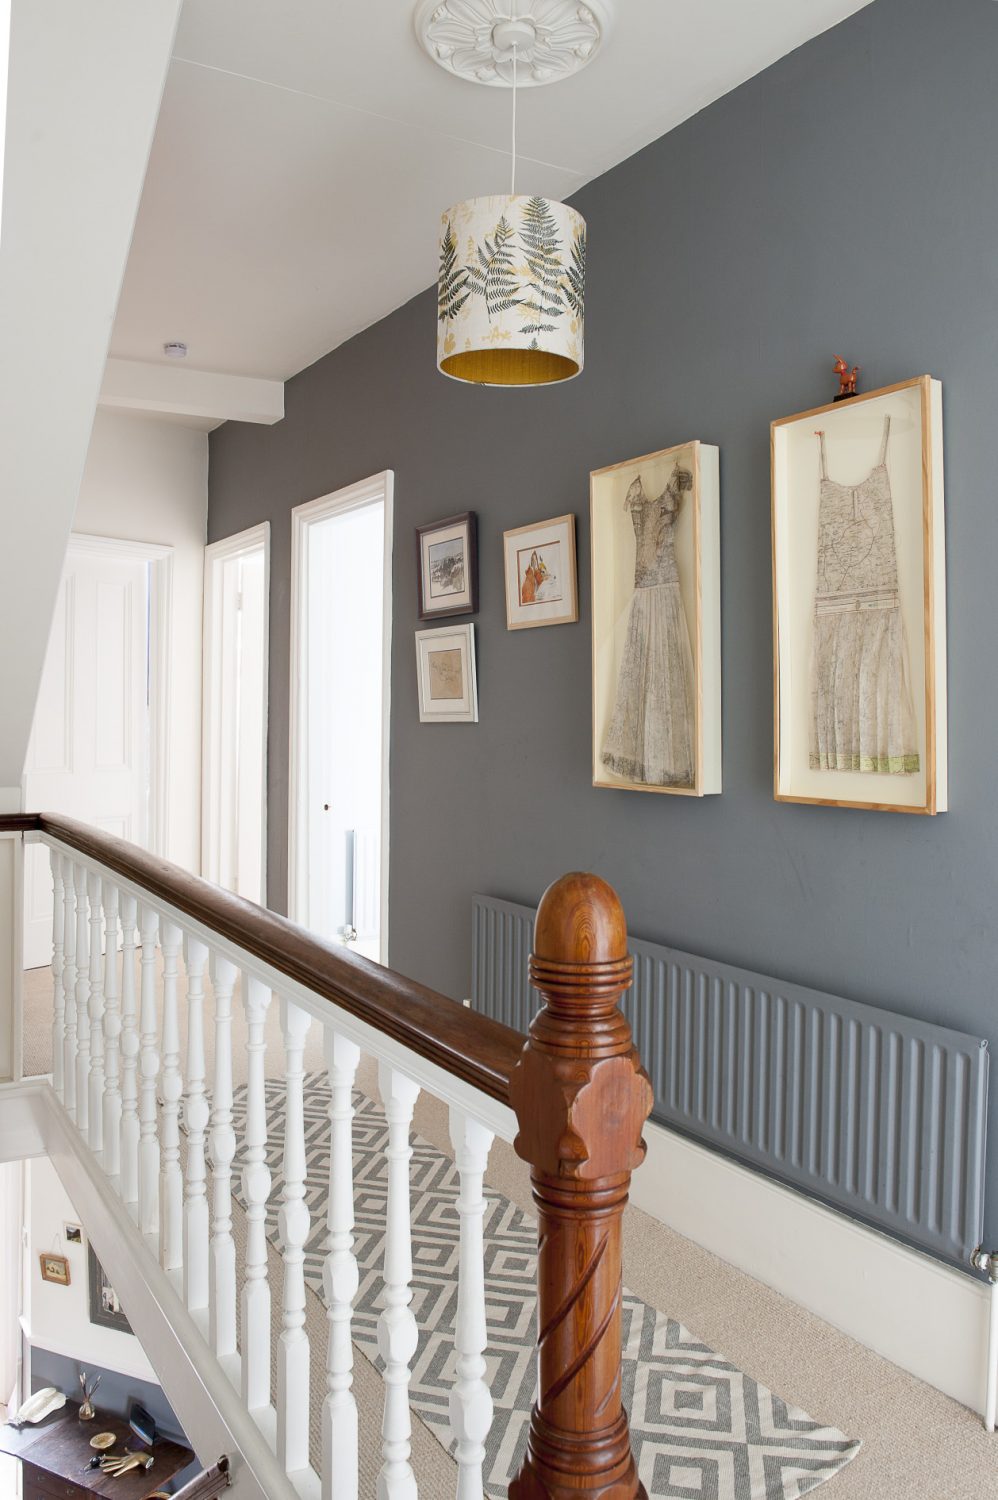 The landing wall is painted in Downpipe by Farrow & Ball. The lampshade is Louise’s design